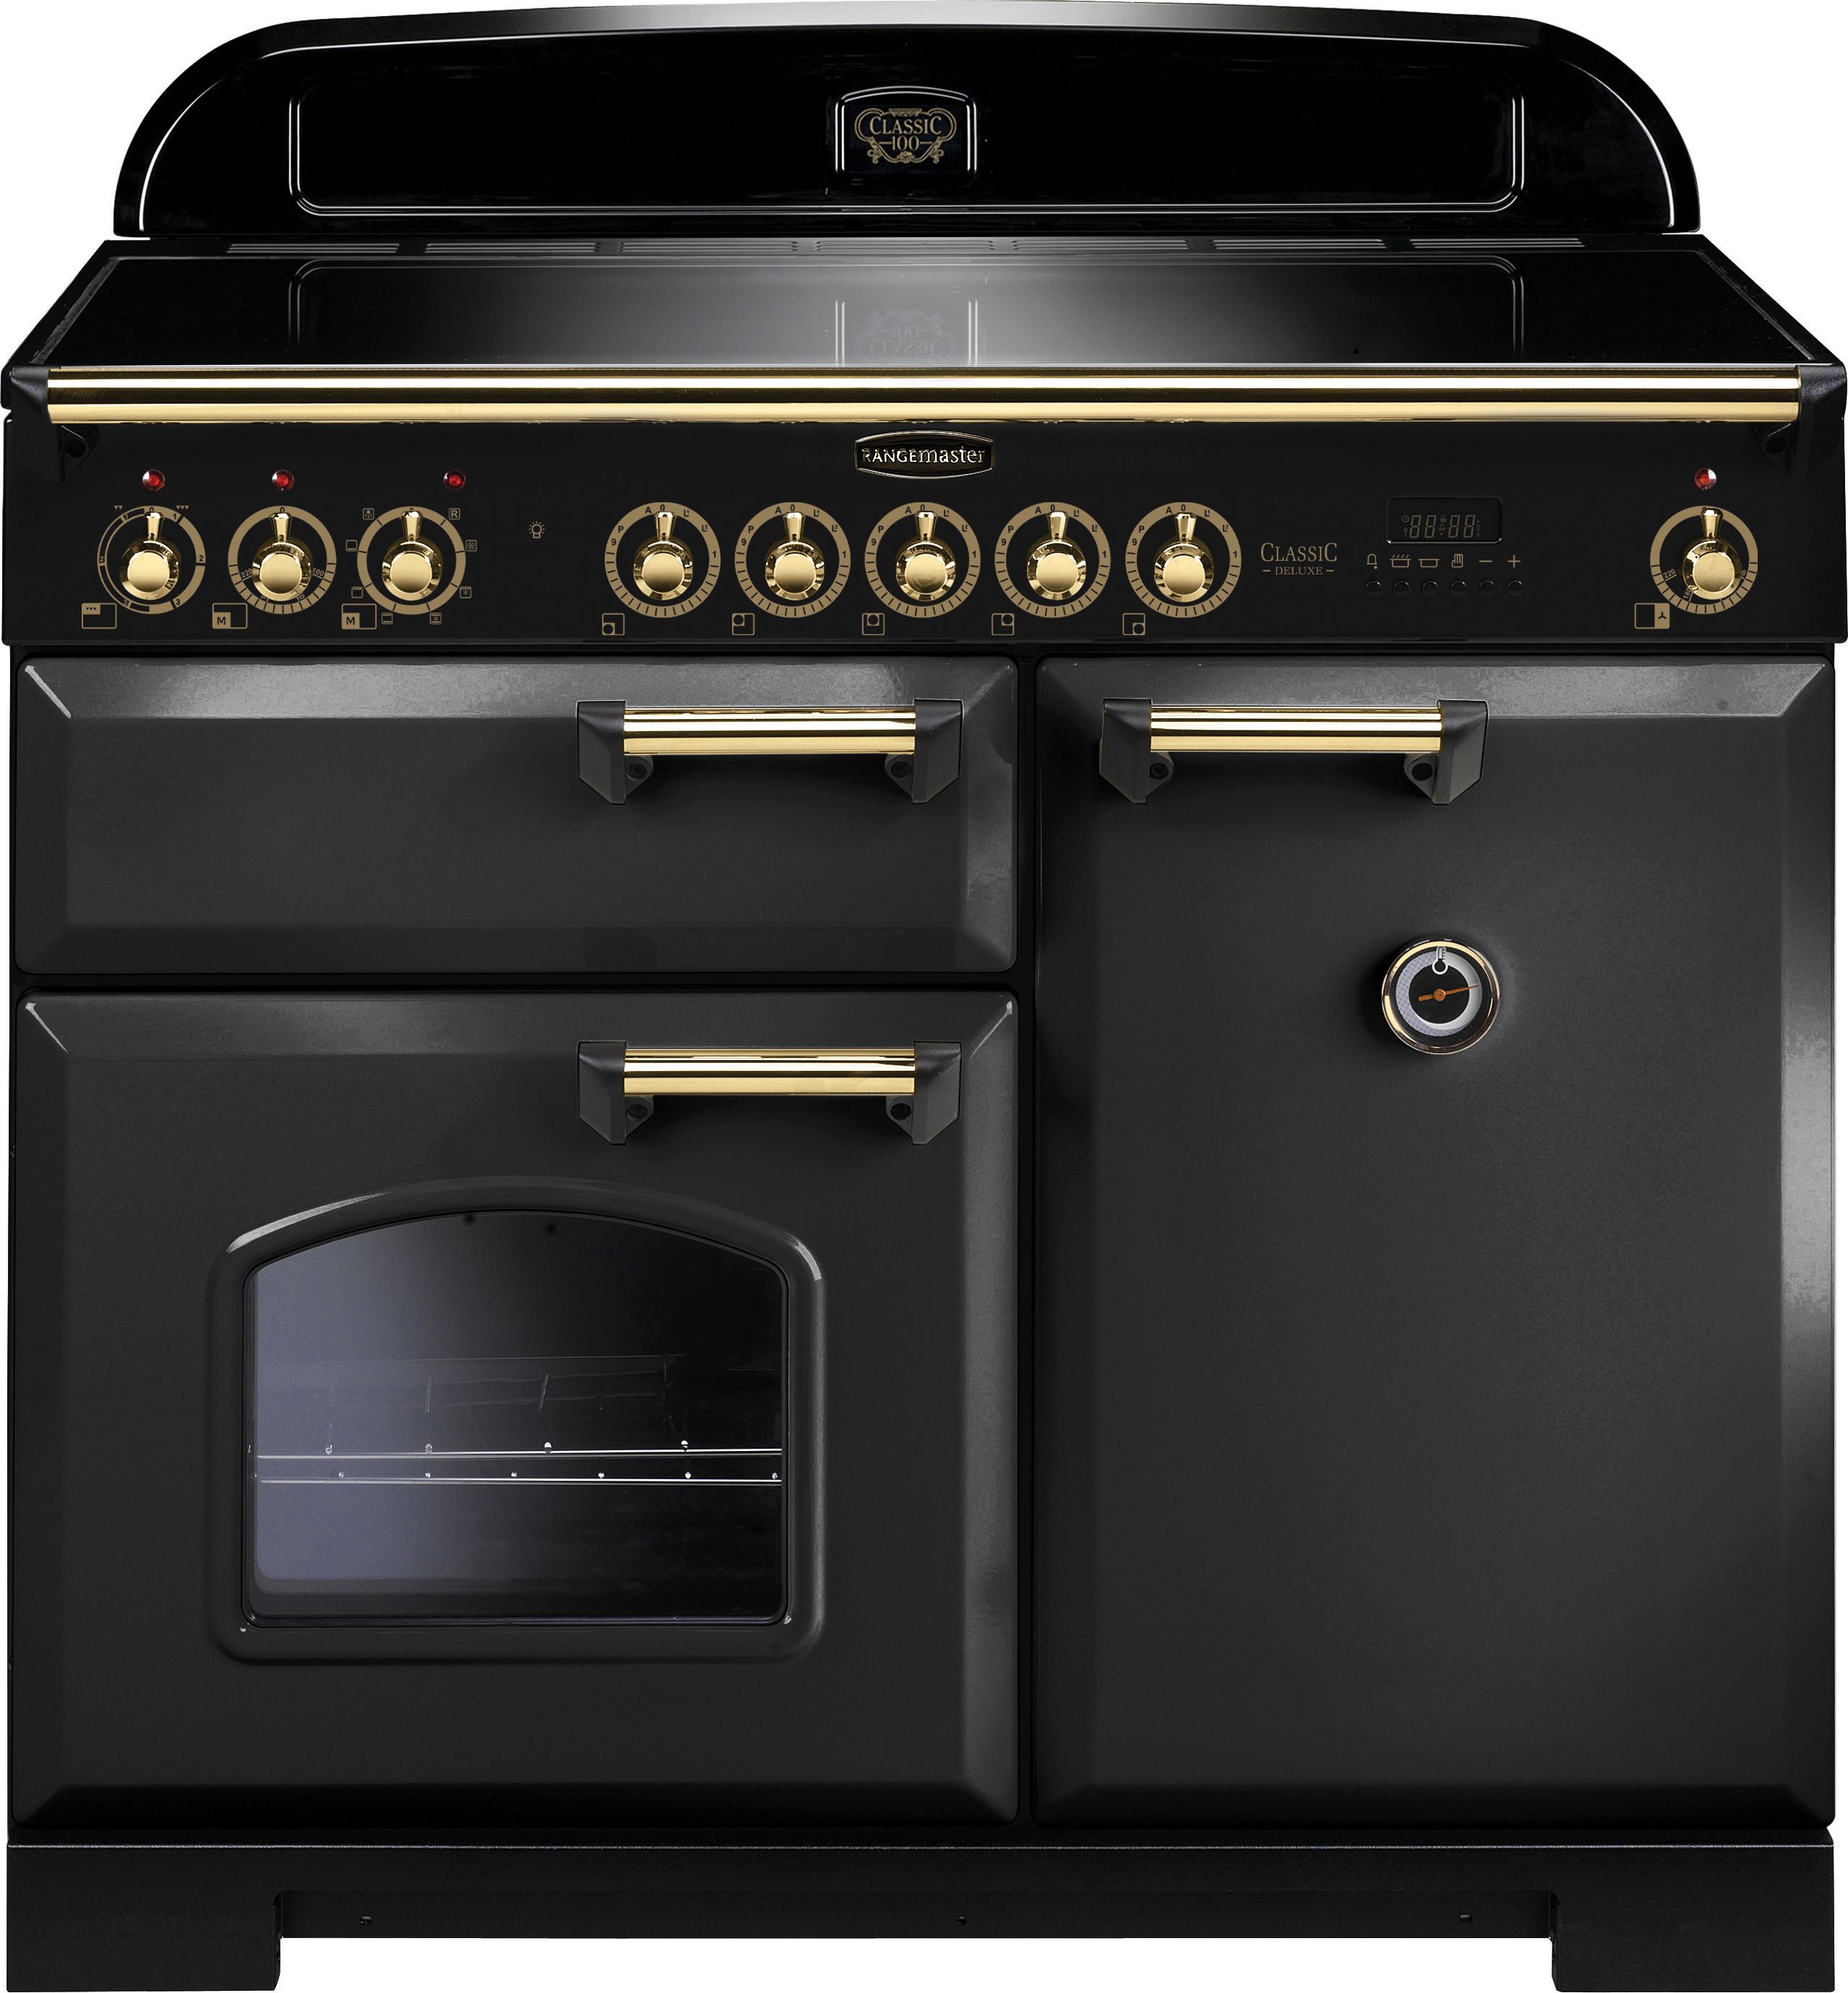 Rangemaster Classic Deluxe CDL100EICB/B 100cm Electric Range Cooker with Induction Hob - Charcoal Black / Brass - A/A Rated, Black